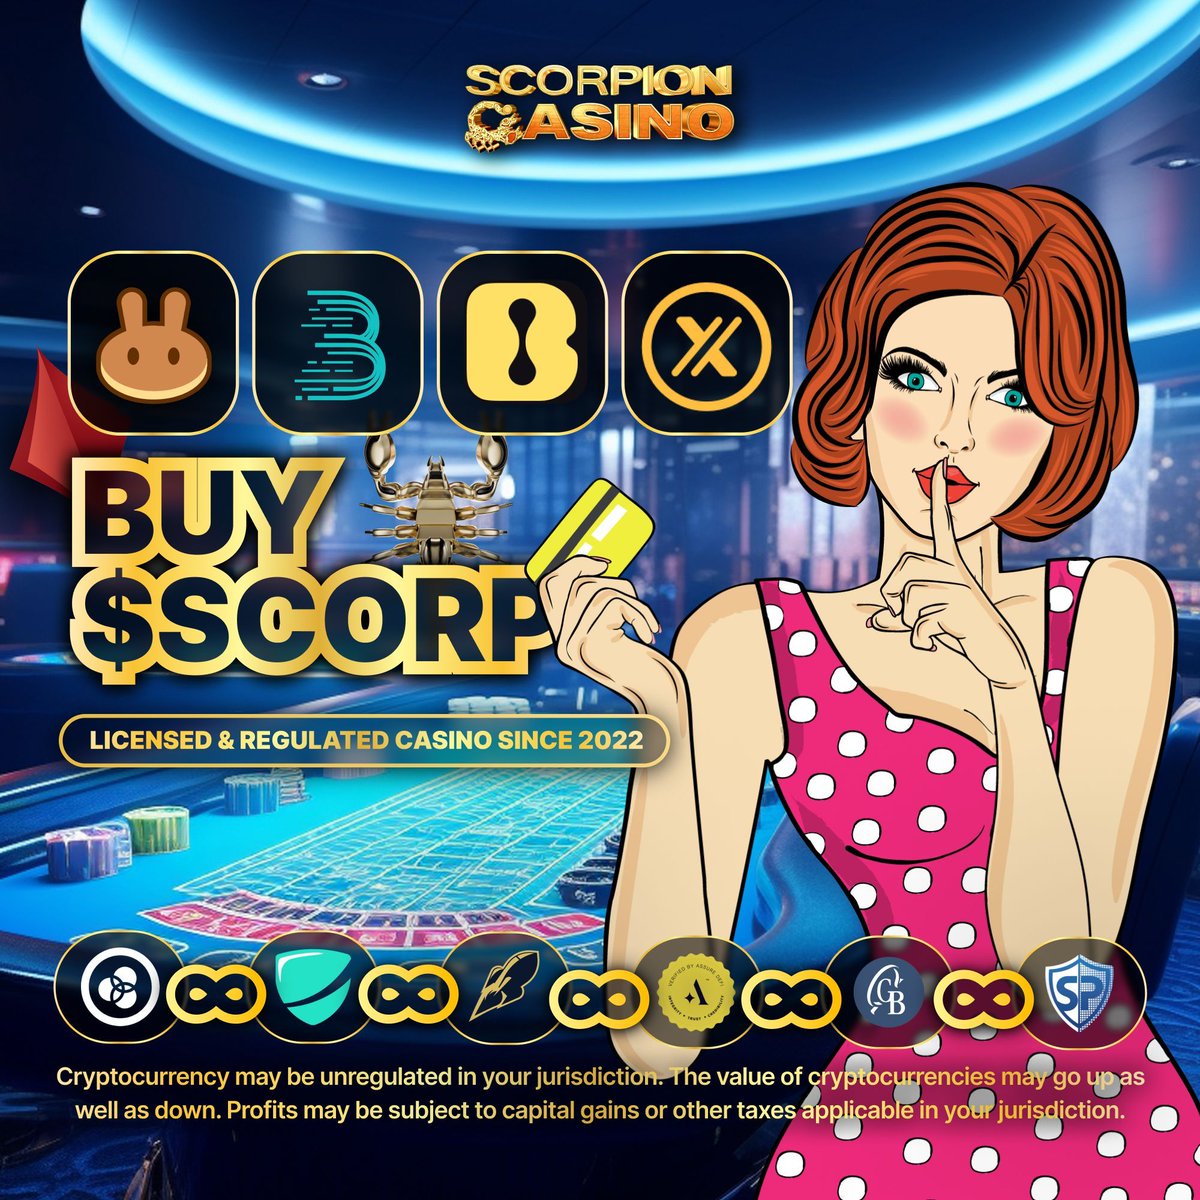 Seize your destiny at Scorpion.casino! ⭐ 💵 Buy now on Pancakeswap HERE: buff.ly/3UlwSpf 💵 Trade $SCORP with Lbank now: buff.ly/3WmfuCv 💵 Trade $SCORP on Bitmart now buff.ly/3xOq0I9 💵 Buy now on Dexview: buff.ly/3W3dqiw